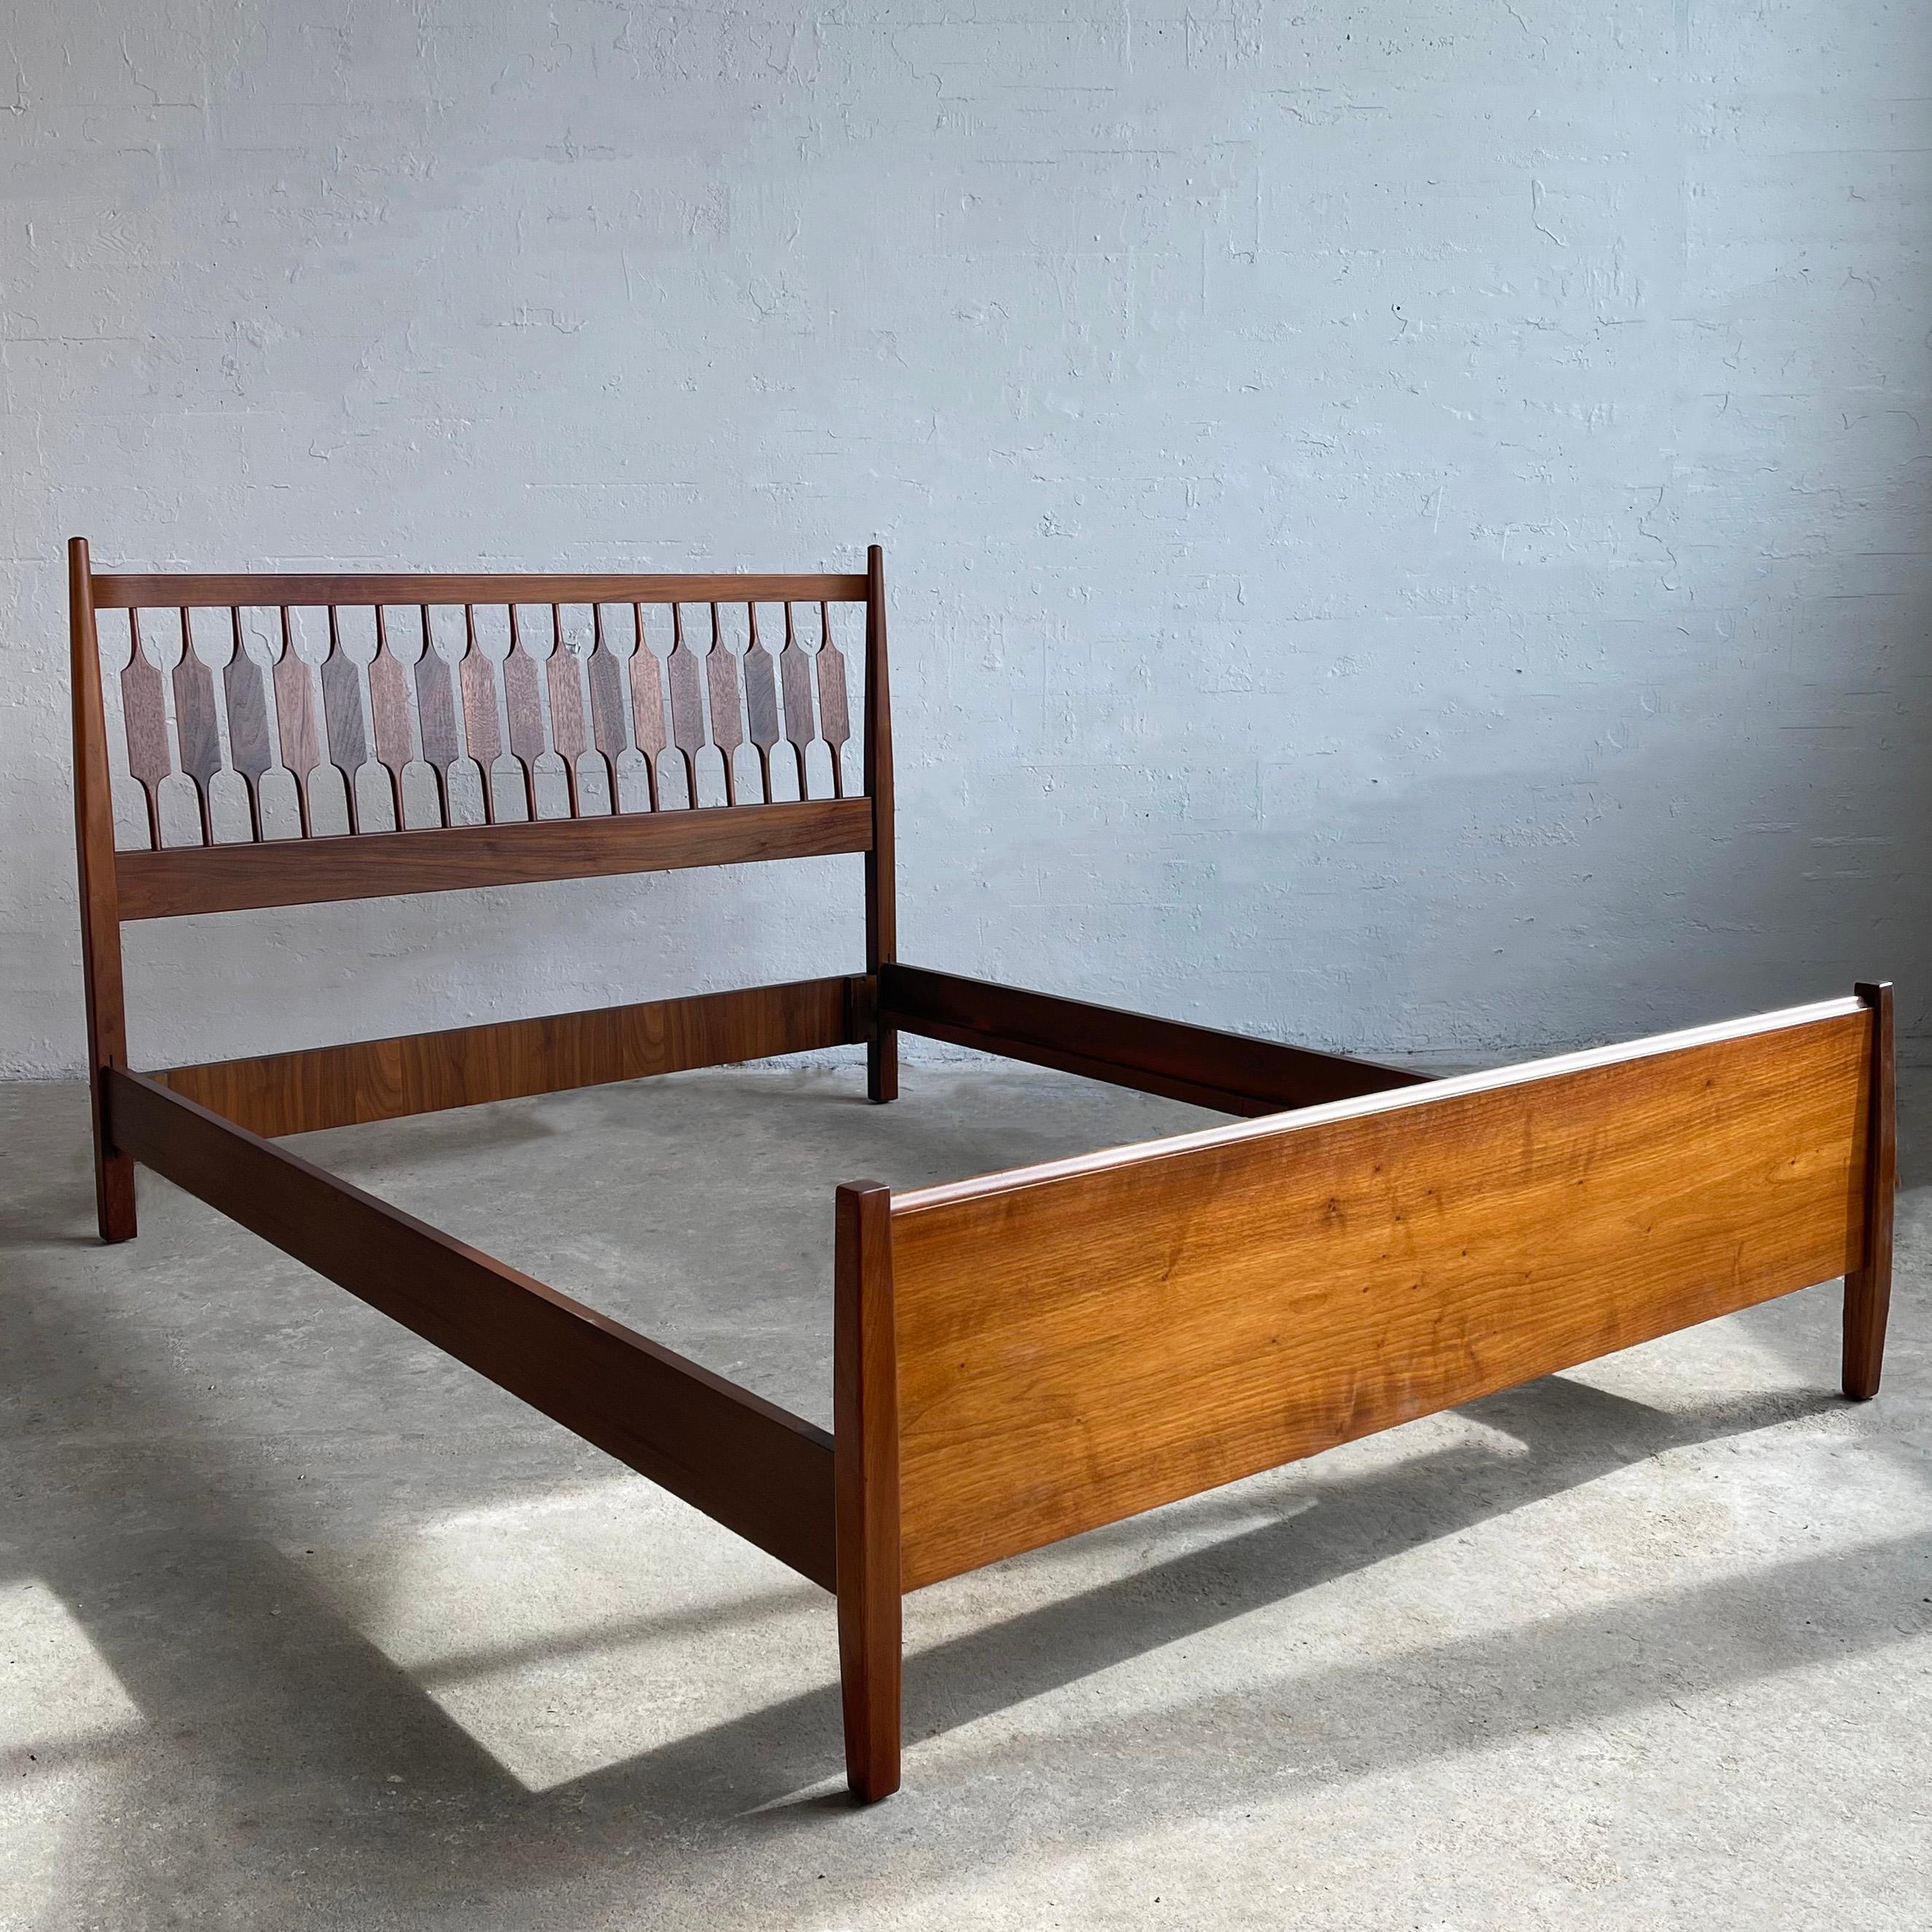 Mid-century modern, full size, black walnut bed designed by Kipp Stewart & Stewart McDougall for Drexel Declaration. The headboard features a decorative slat panel with a solid footboard and side rails included. 